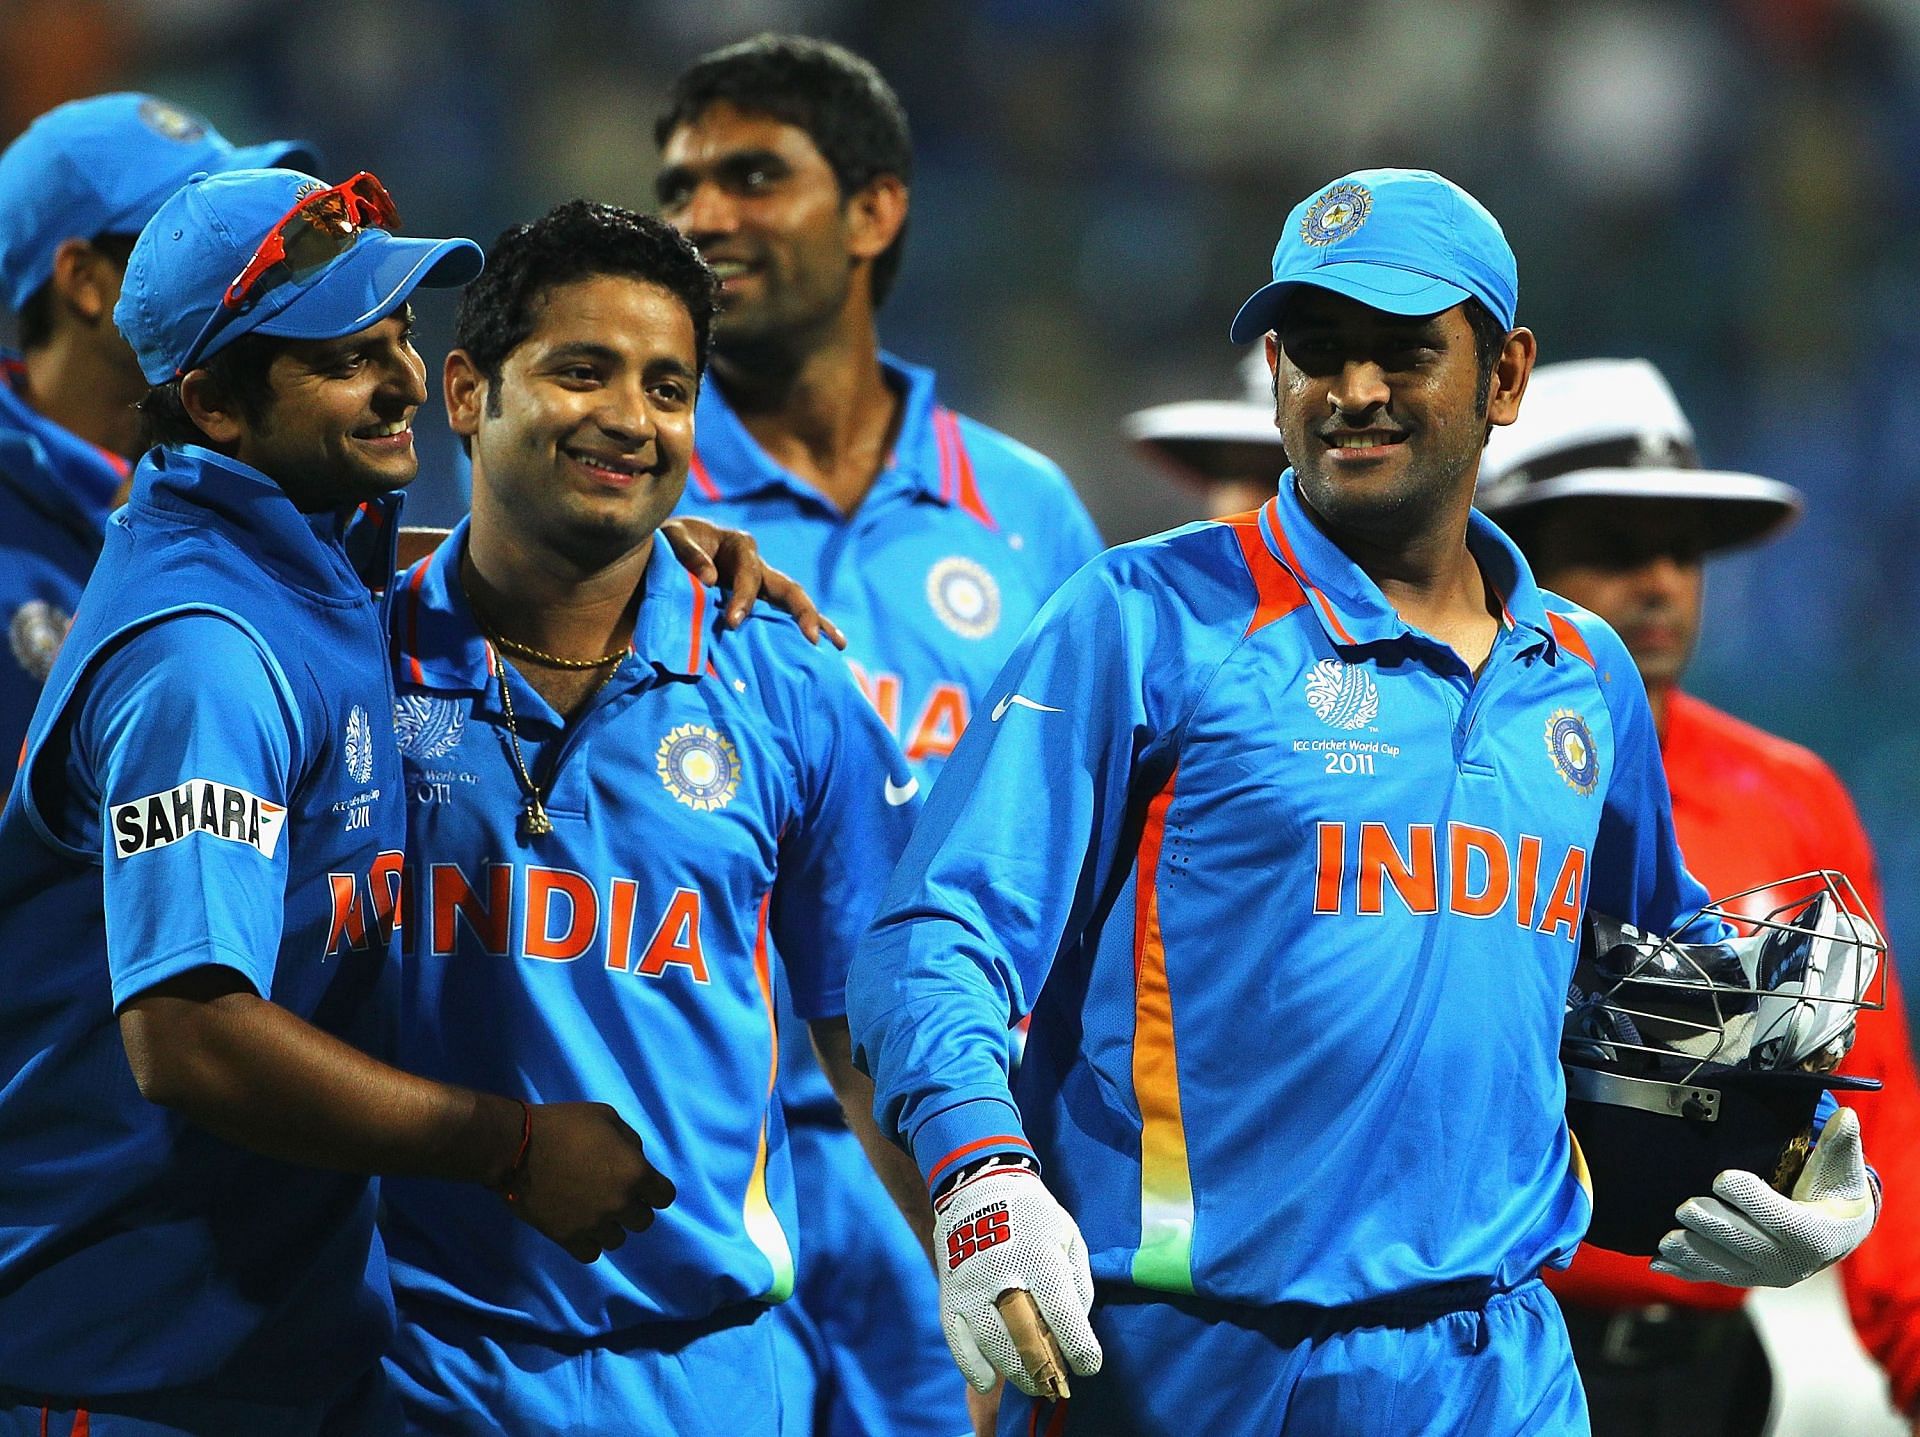 Piyush Chawla played with Suresh Raina for the Indian cricket team in the 2011 World Cup